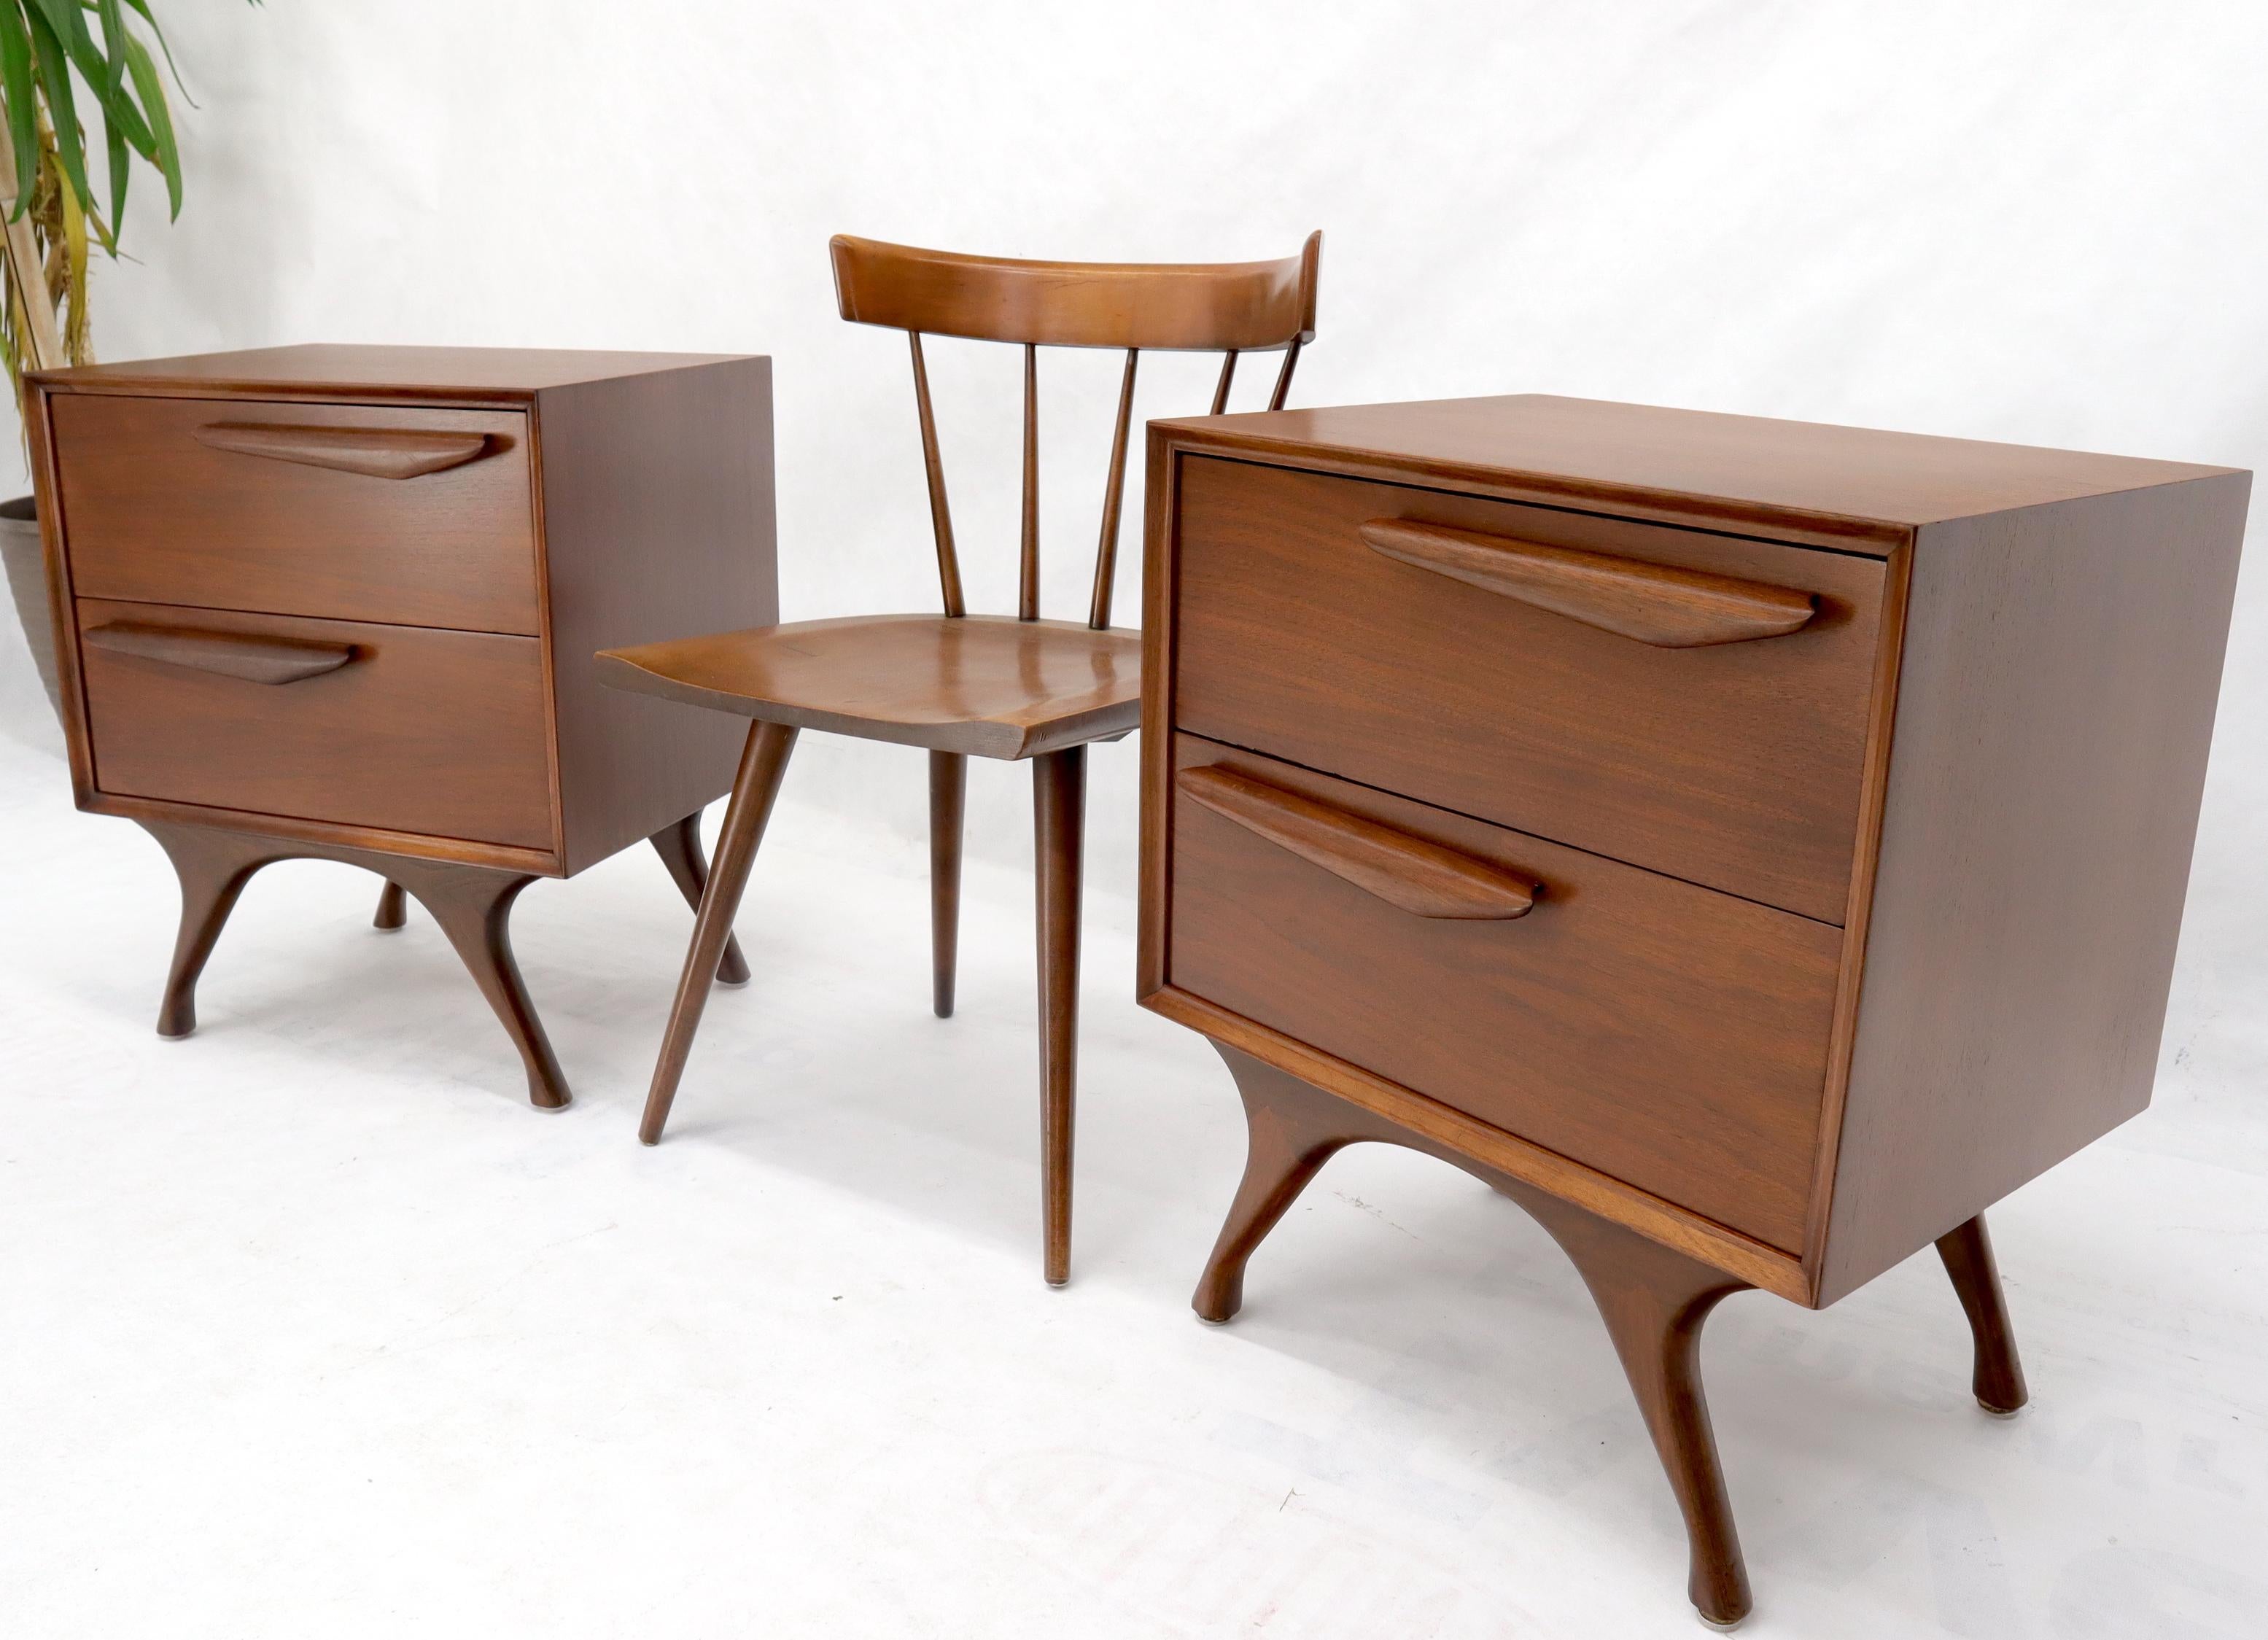 20th Century Pair of American Modern Walnut Sculptured Legs Pulls Two Drawers Nightstands For Sale